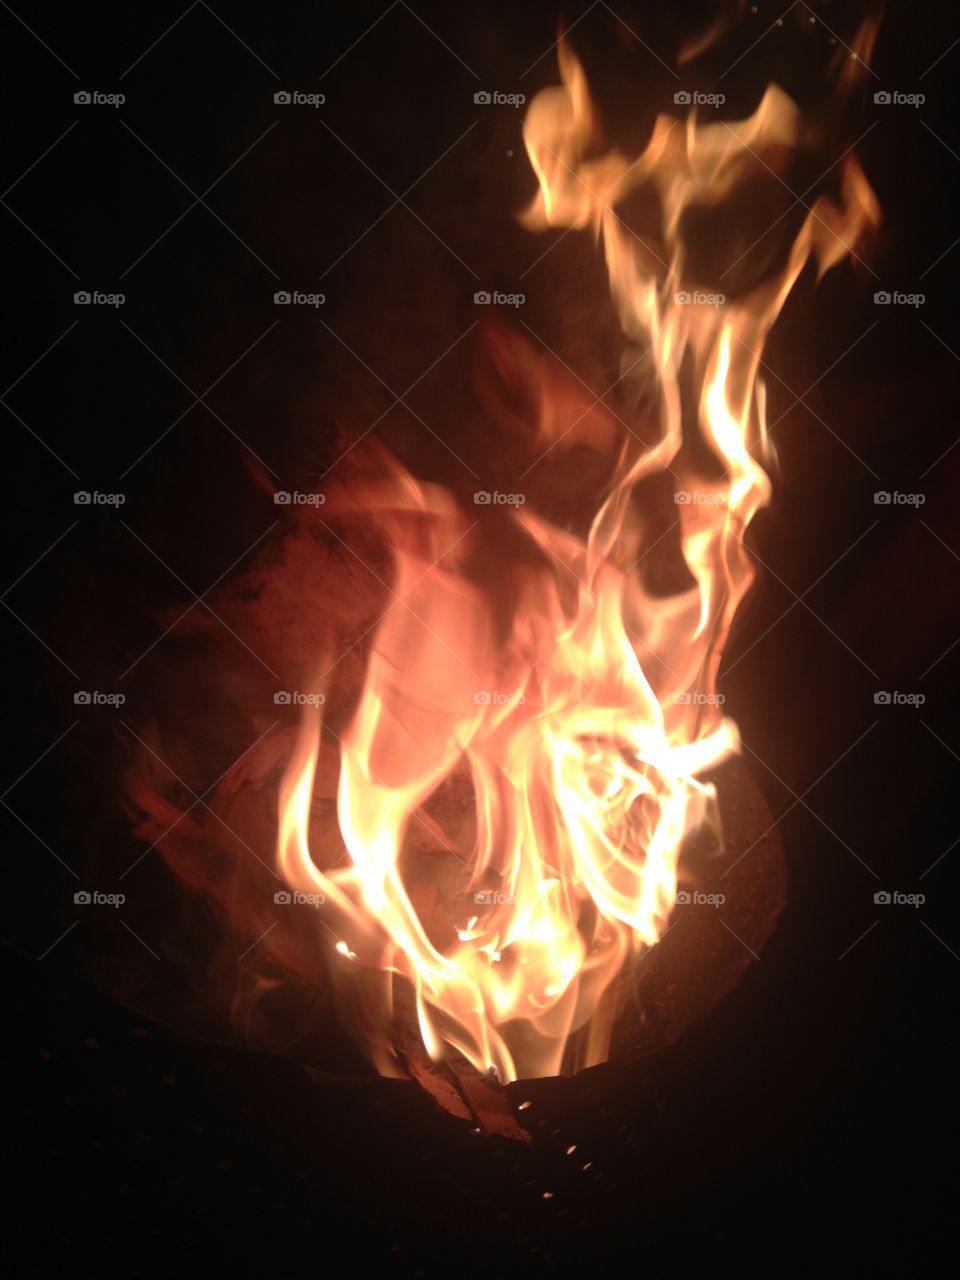 Face in the fire